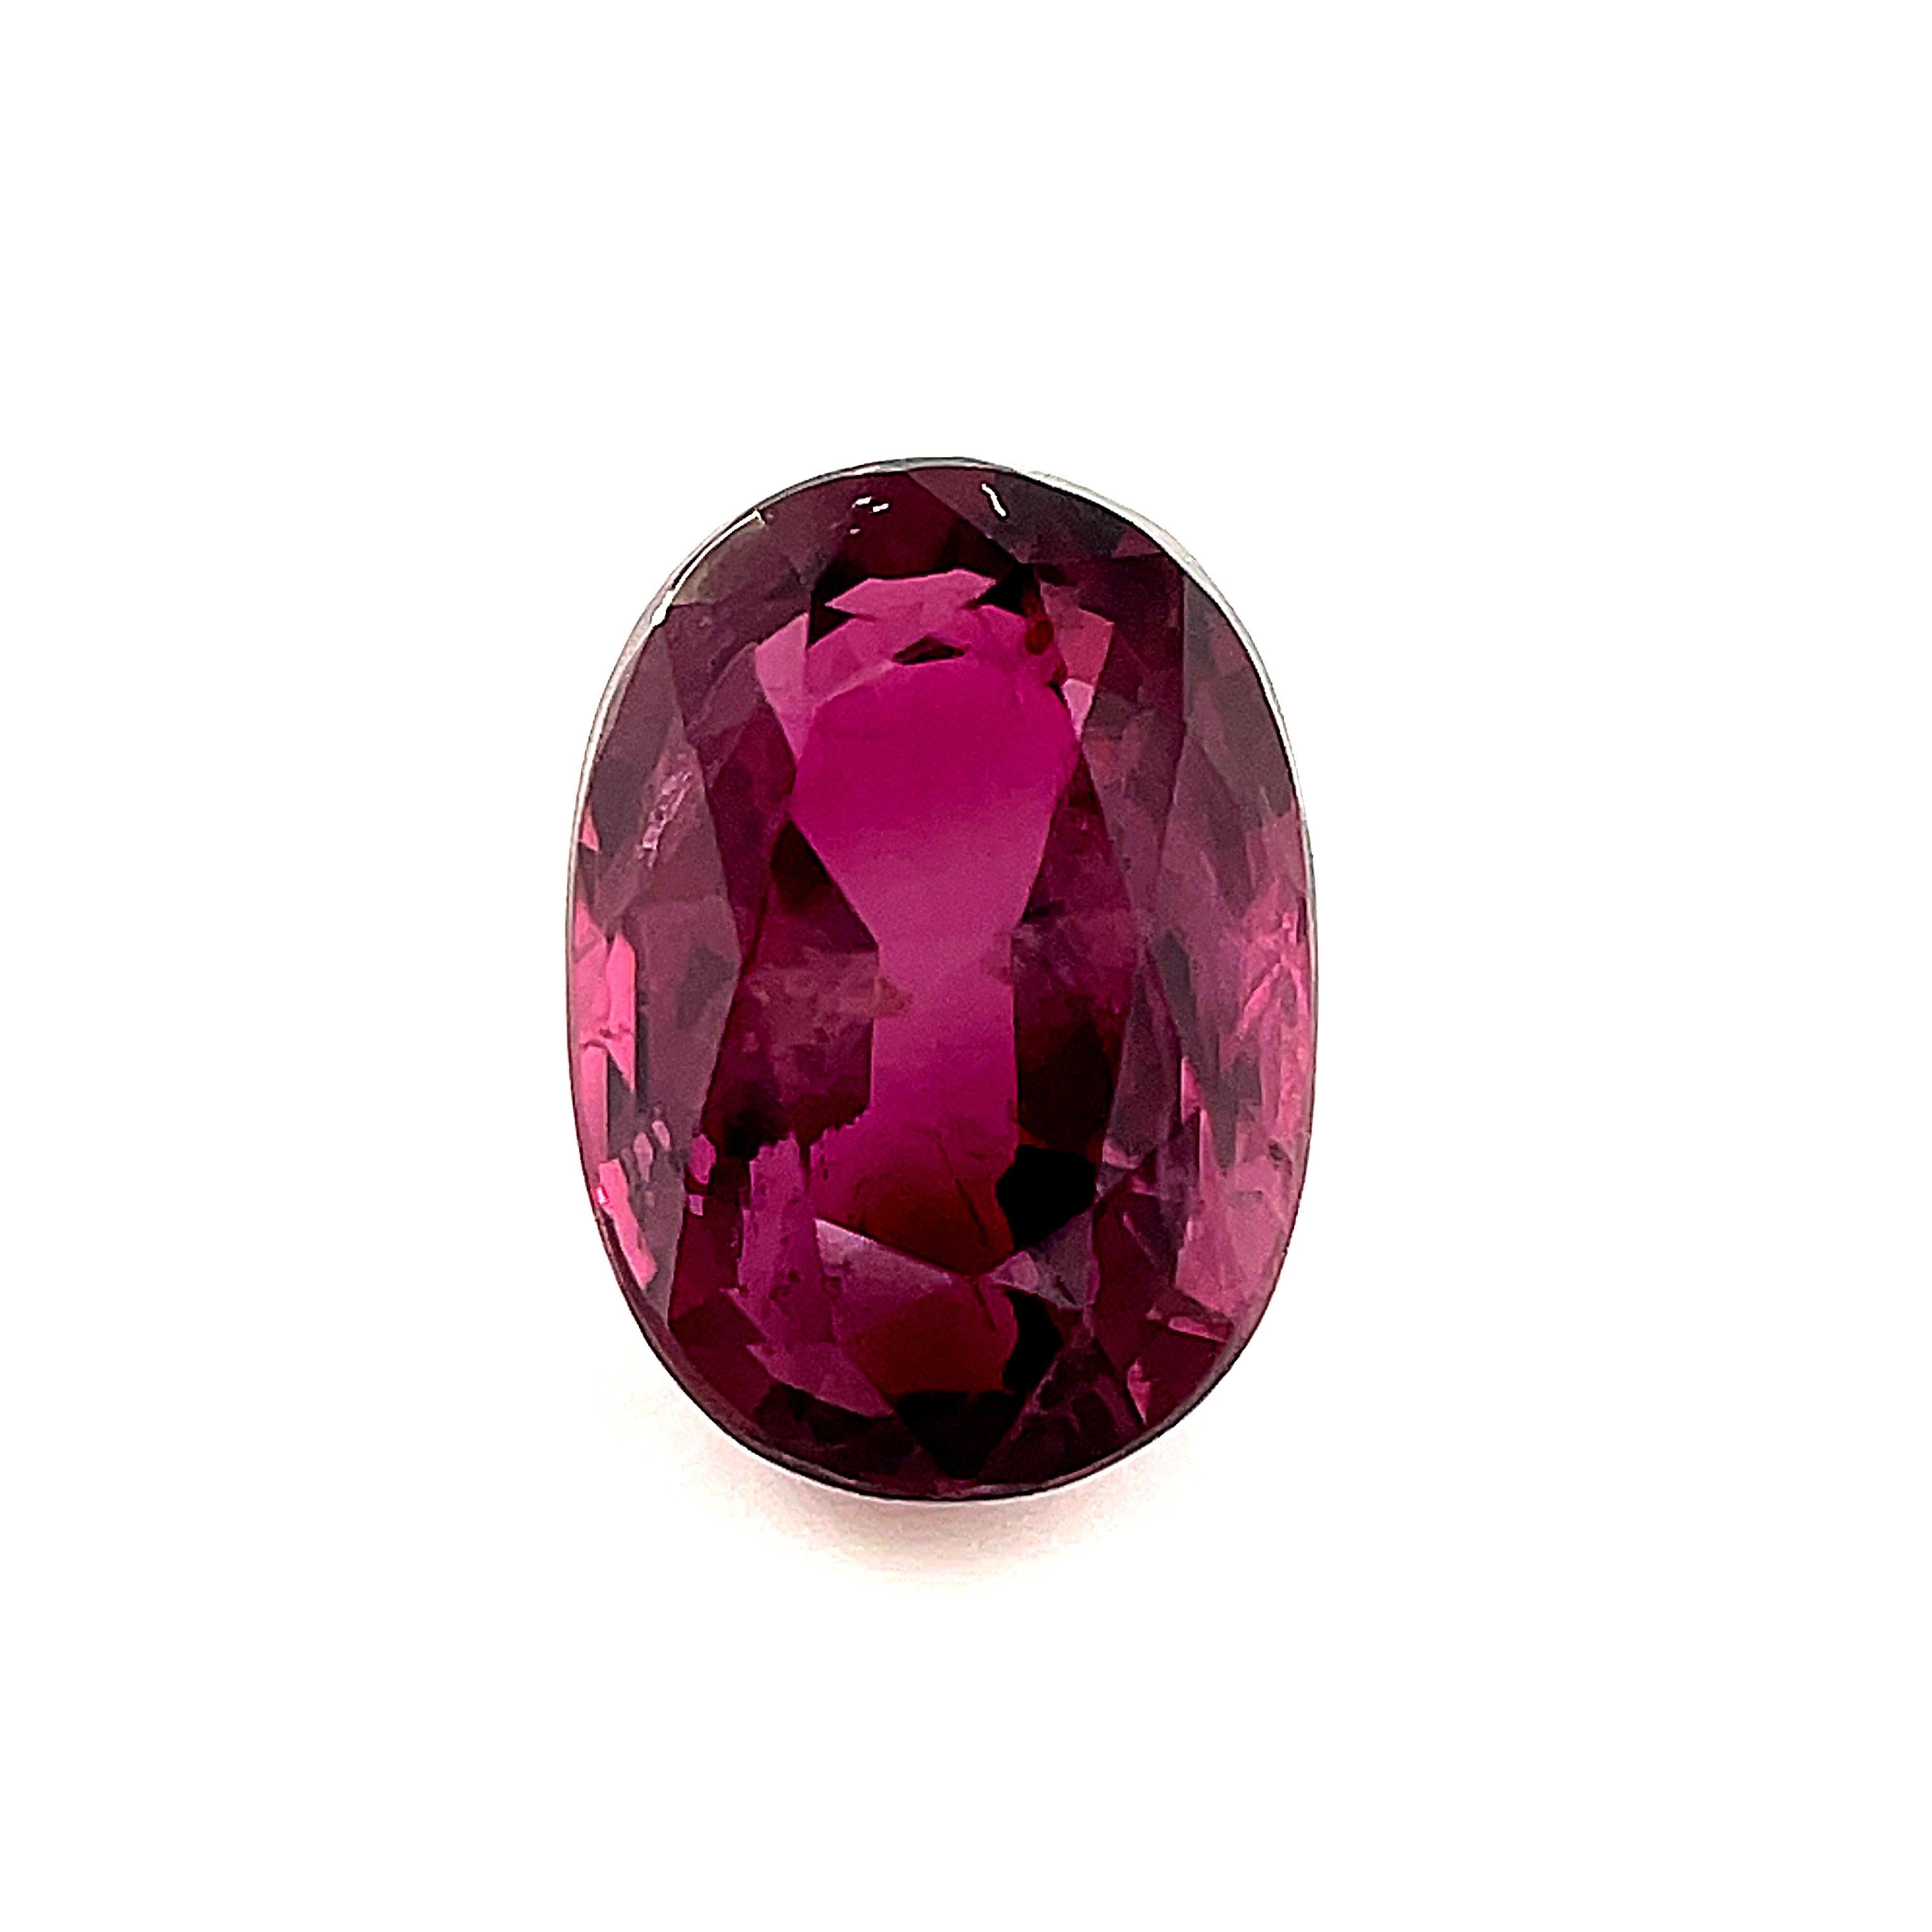 1.24 Carat Oval Loose Unset Ruby Gemstone For Sale 1